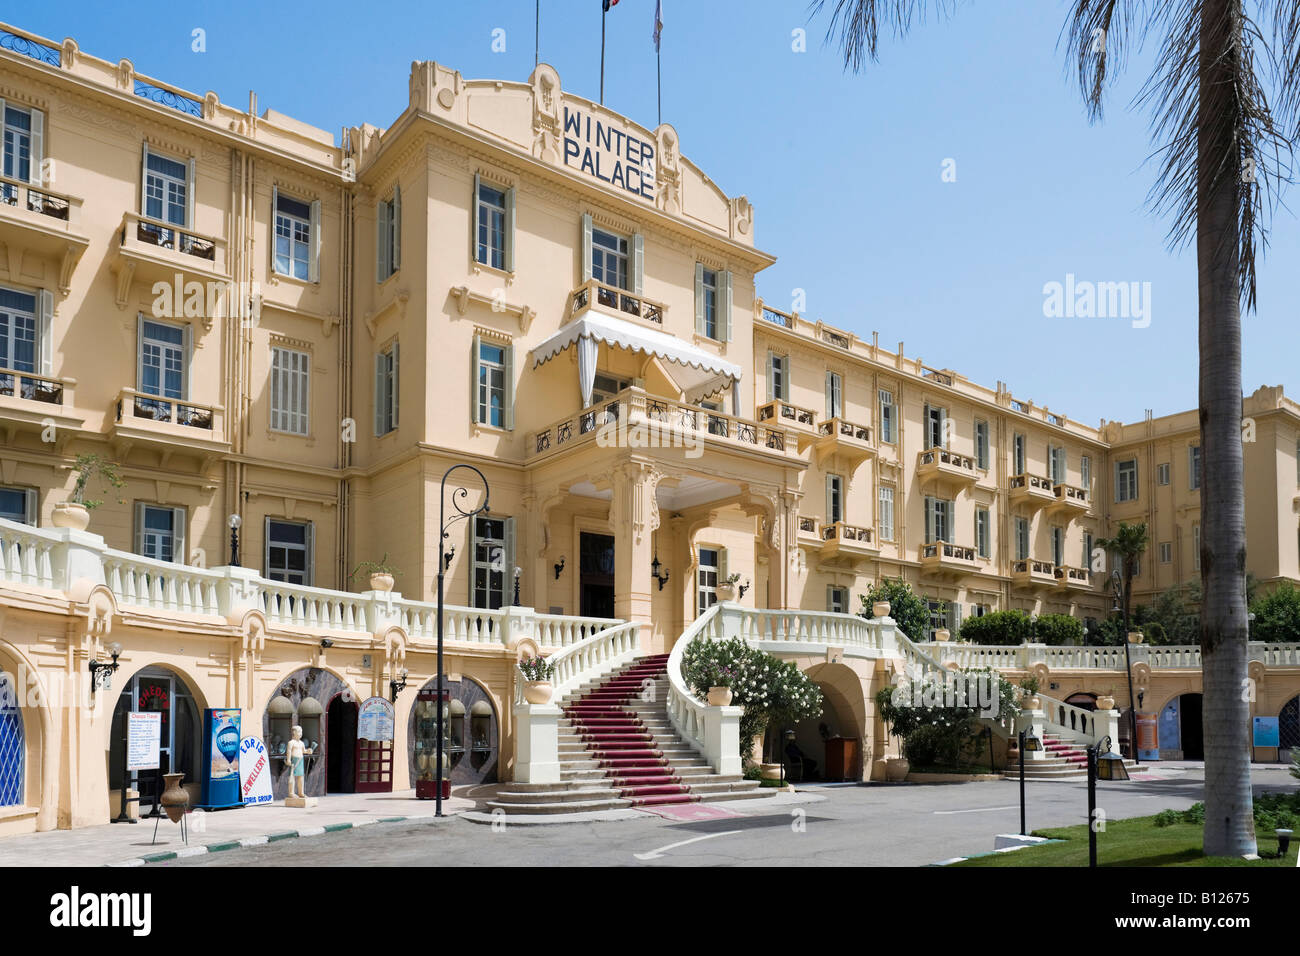 The famous Winter Palace Hotel (location for Agatha Christie's Death on the Nile), The Corniche, Luxor, Nile Valley, Egypt Stock Photo